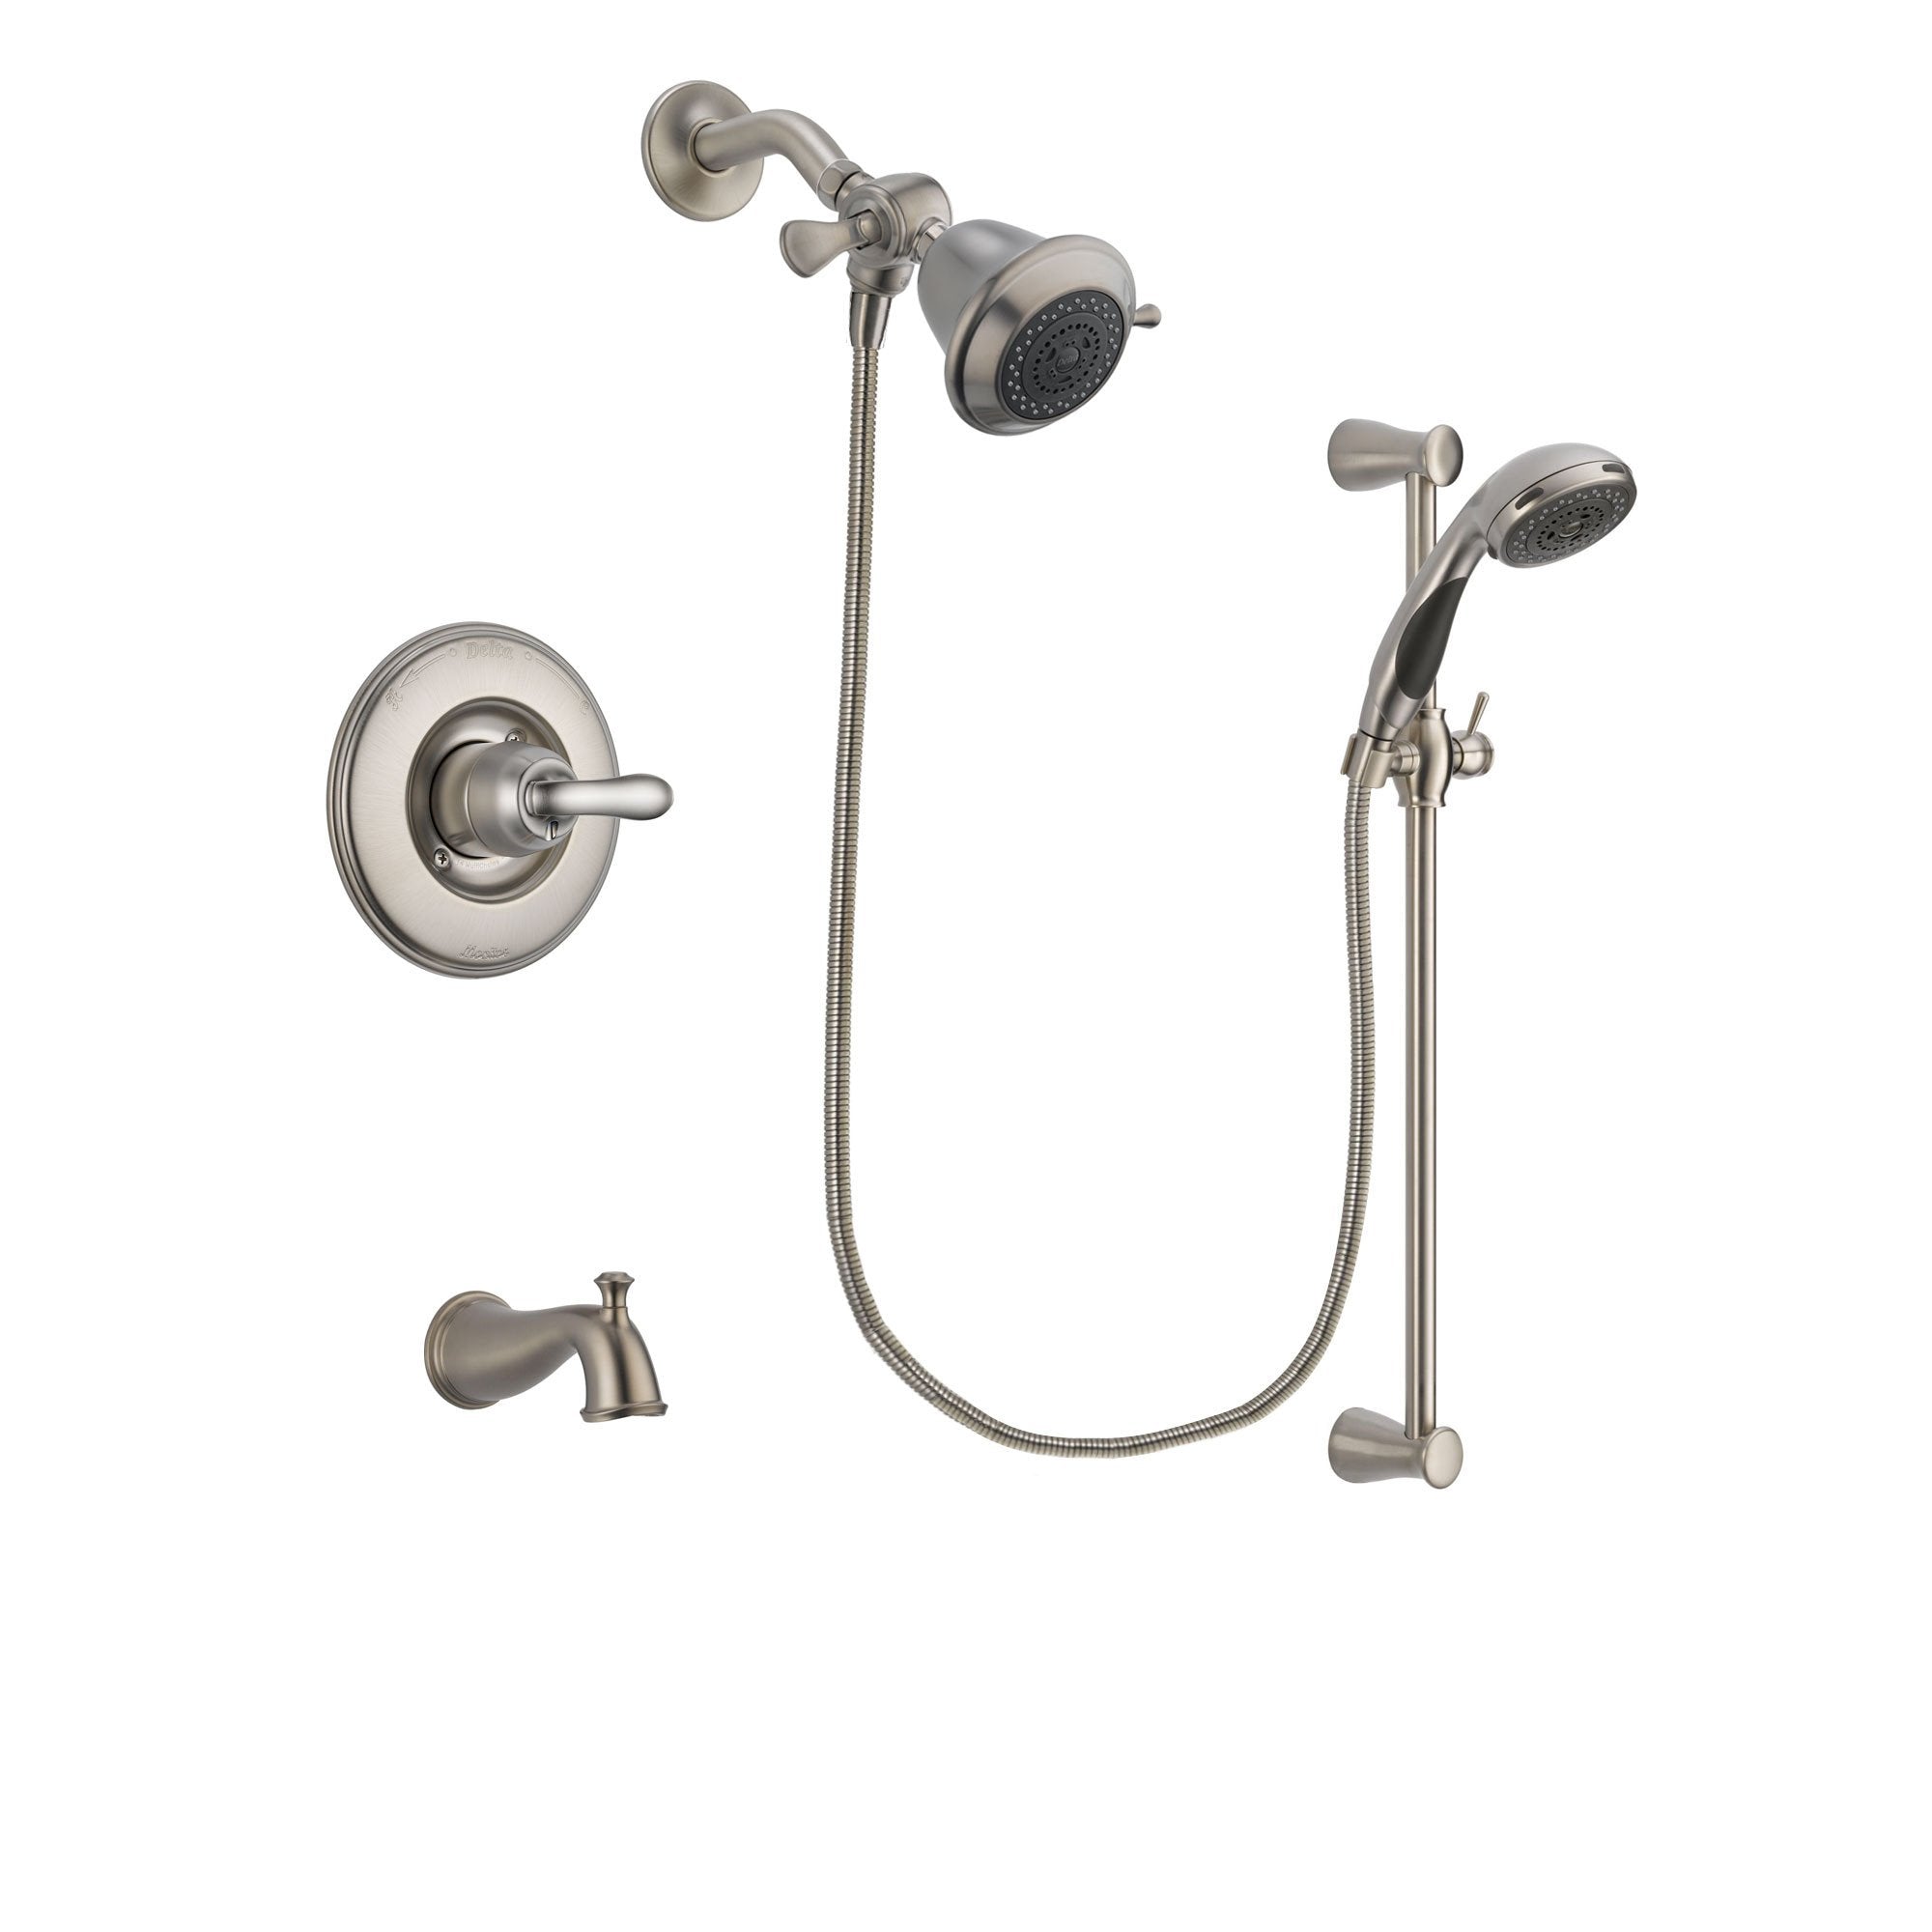 Delta Linden Stainless Steel Finish Tub and Shower Faucet System Package with Shower Head and Handheld Shower Spray with Slide Bar Includes Rough-in Valve and Tub Spout DSP1531V